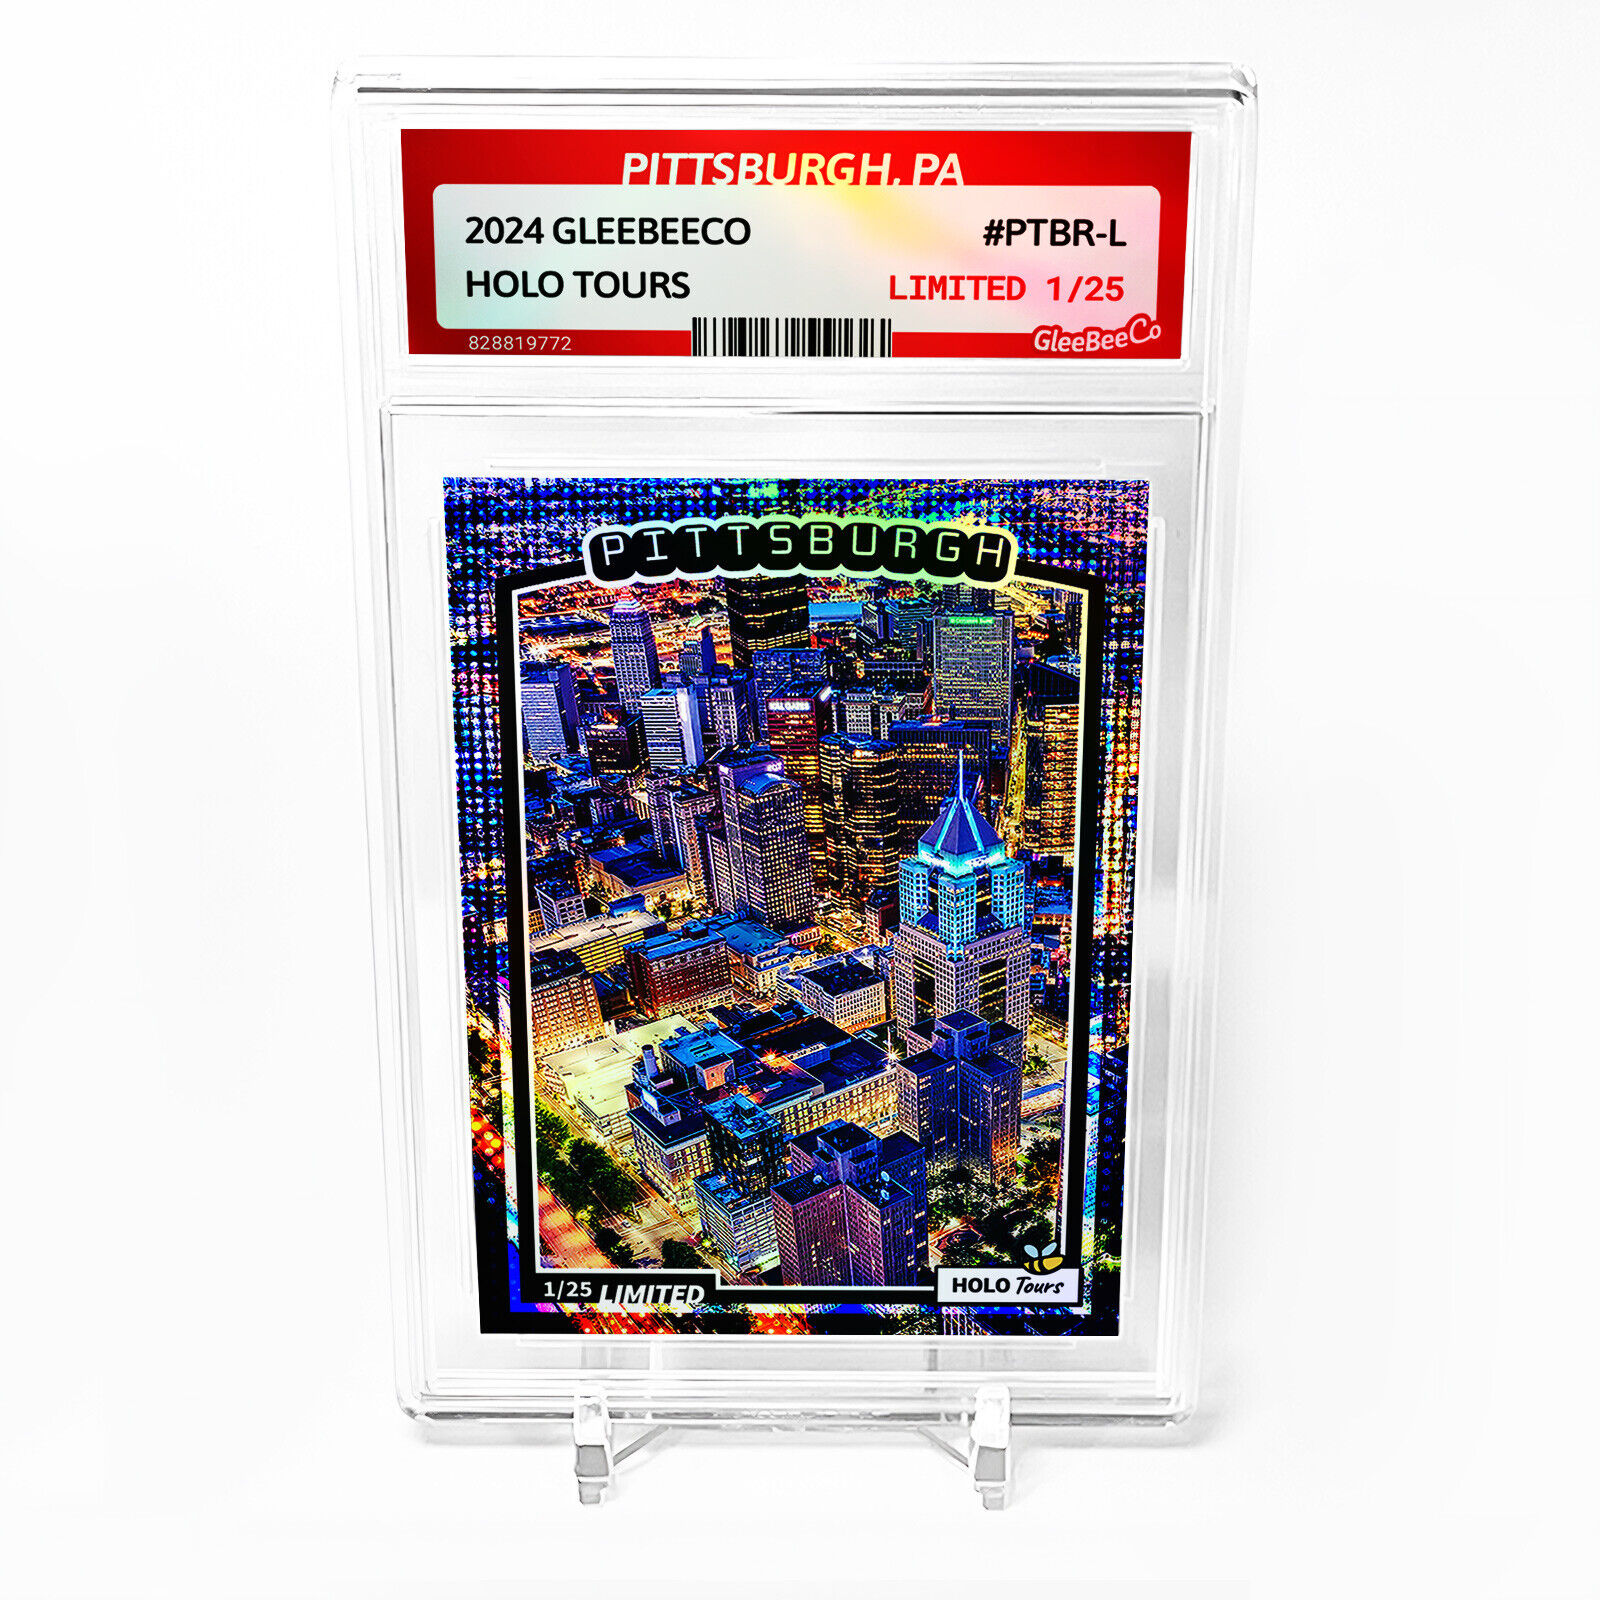 PITTSBURGH, PA Card 2024 GleeBeeCo Holo Tours Slabbed #PTBR-L Only /25